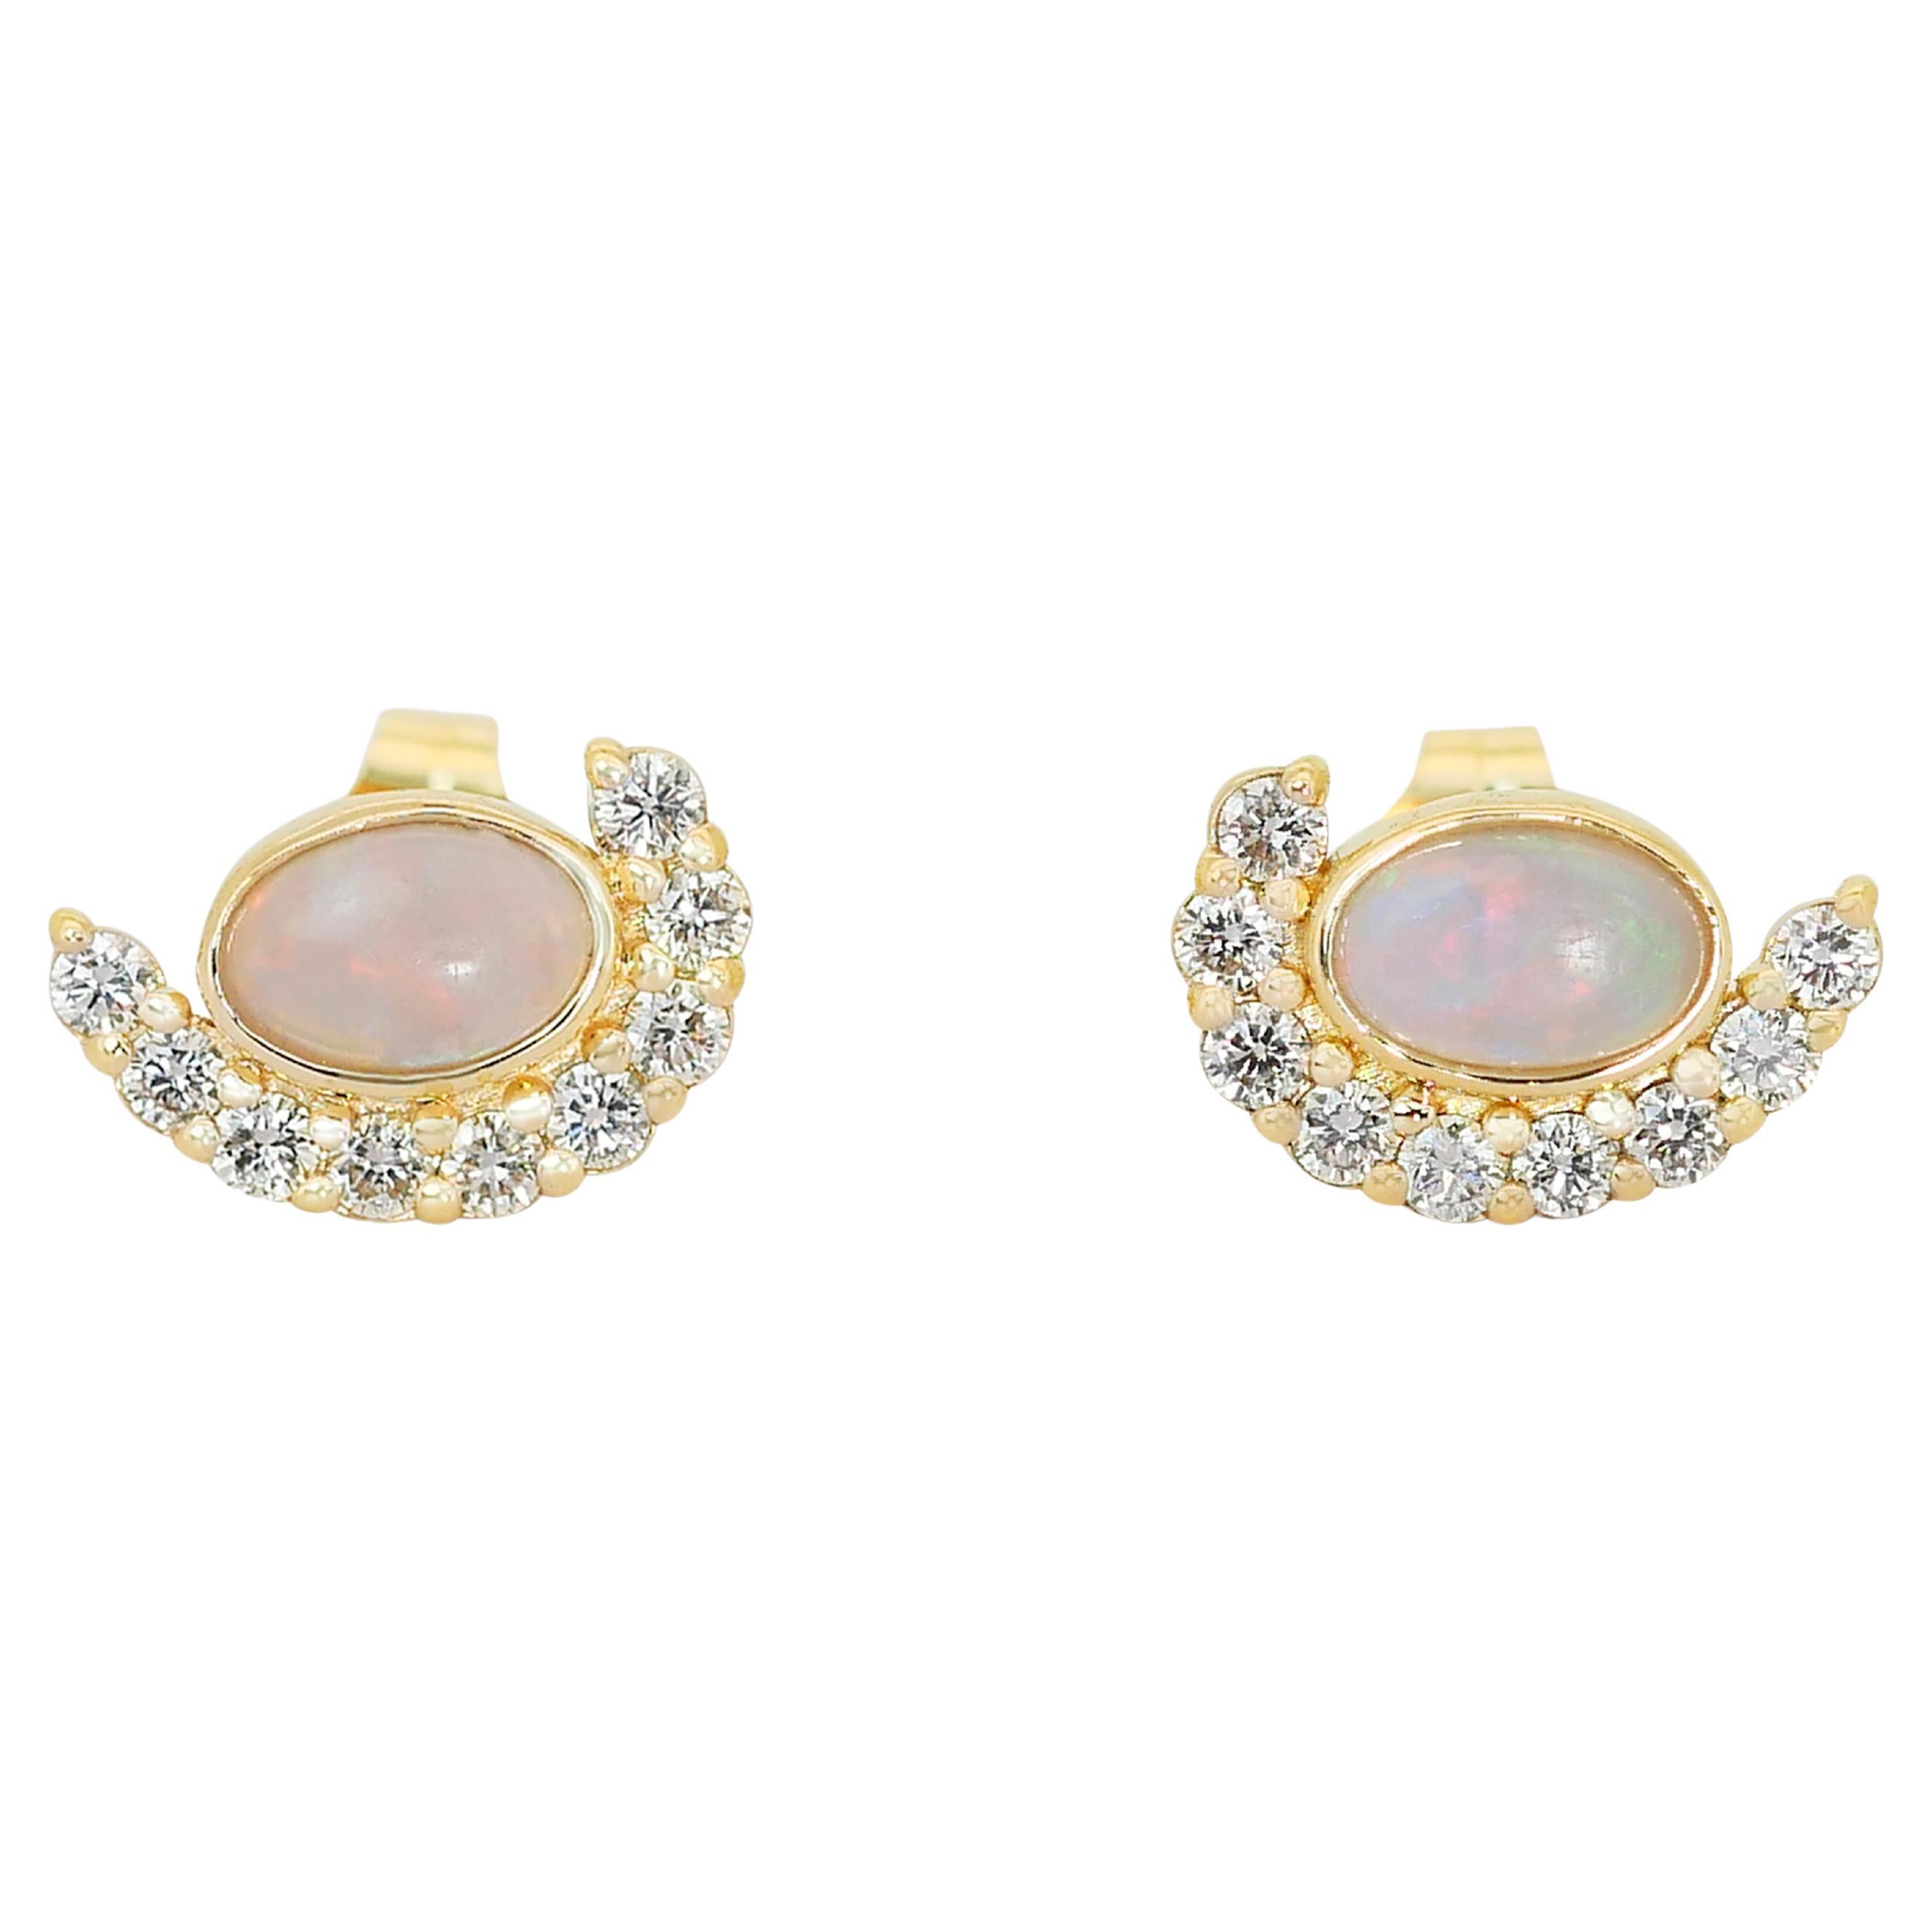  Lovely 14k Yellow Gold Opal and Diamond Halo Stud Earrings w/1.15 ct - IGI Cert For Sale